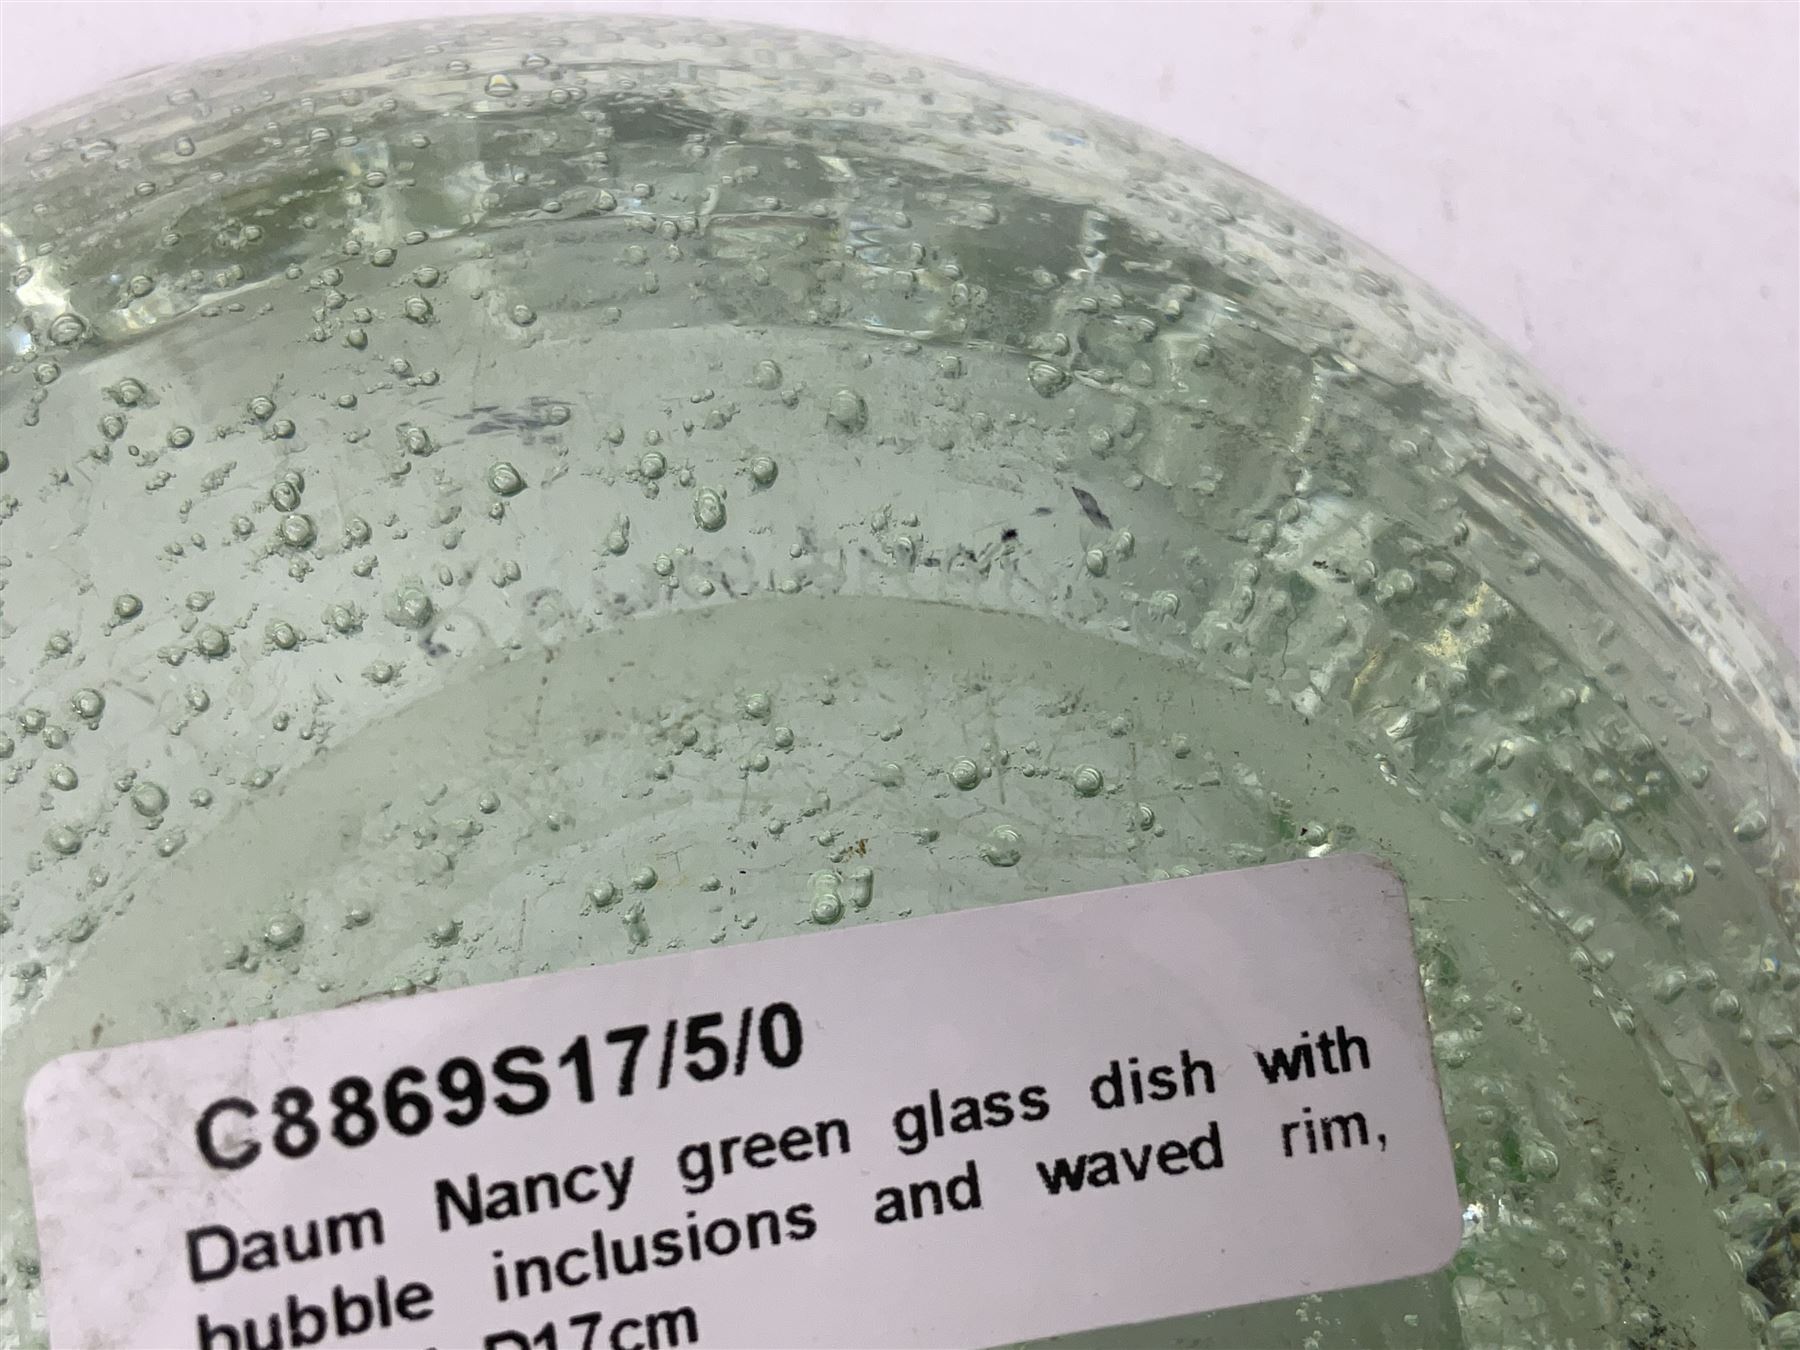 Daum Nancy green glass dish with bubble inclusions and waved rim - Image 3 of 4